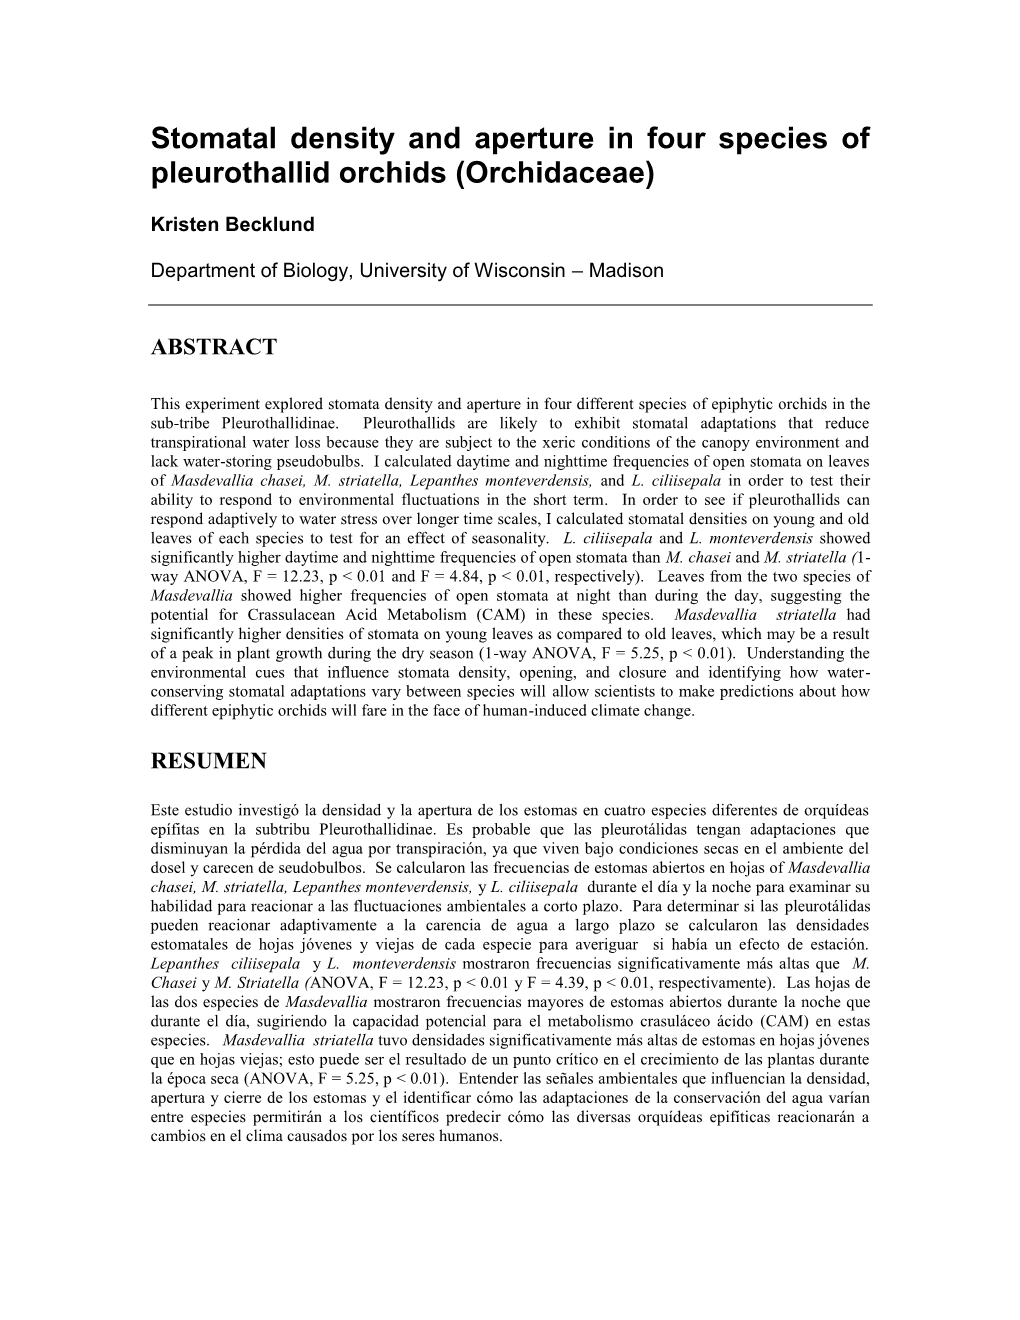 Stomatal Density and Aperture in Four Species of Pleurothallid Orchids (Orchidaceae)